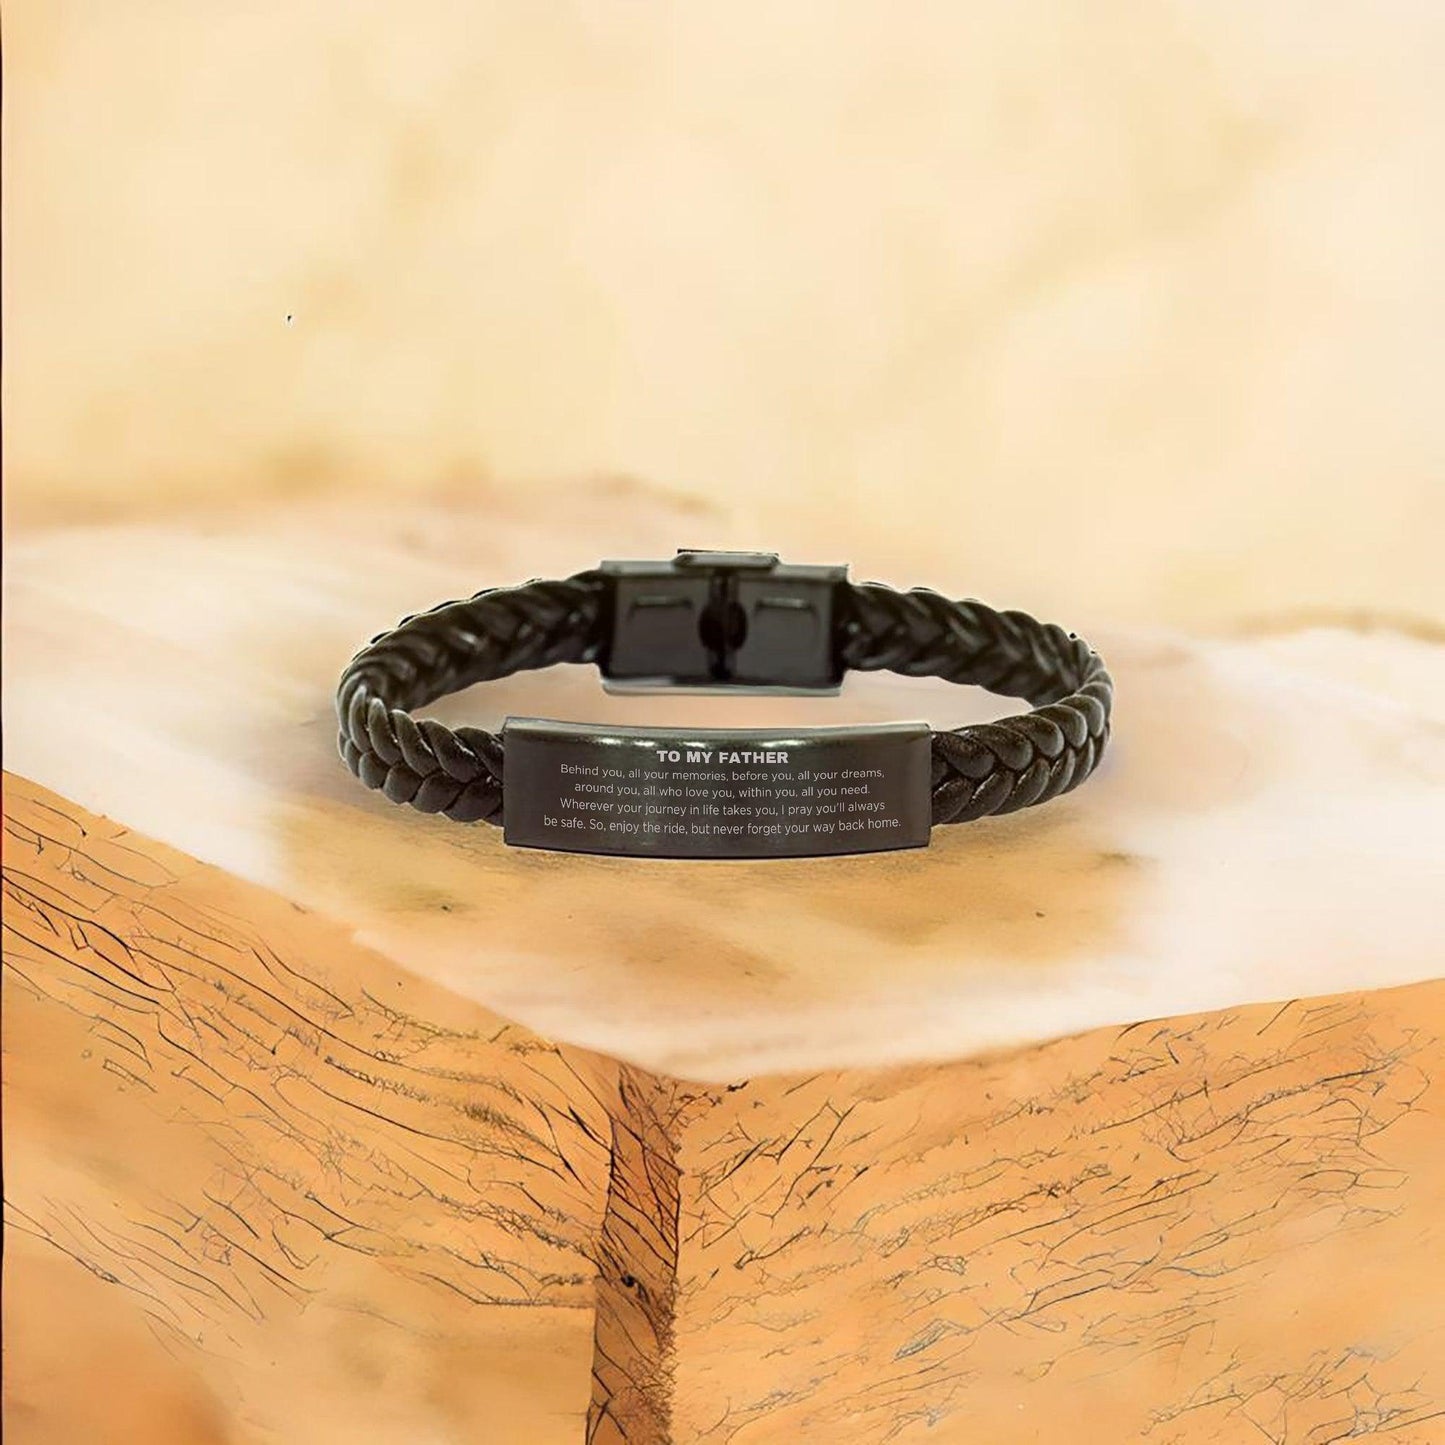 Father Braided Leather Bracelet Birthday Christmas Unique Gifts Behind you, all your memories, before you, all your dreams - Mallard Moon Gift Shop